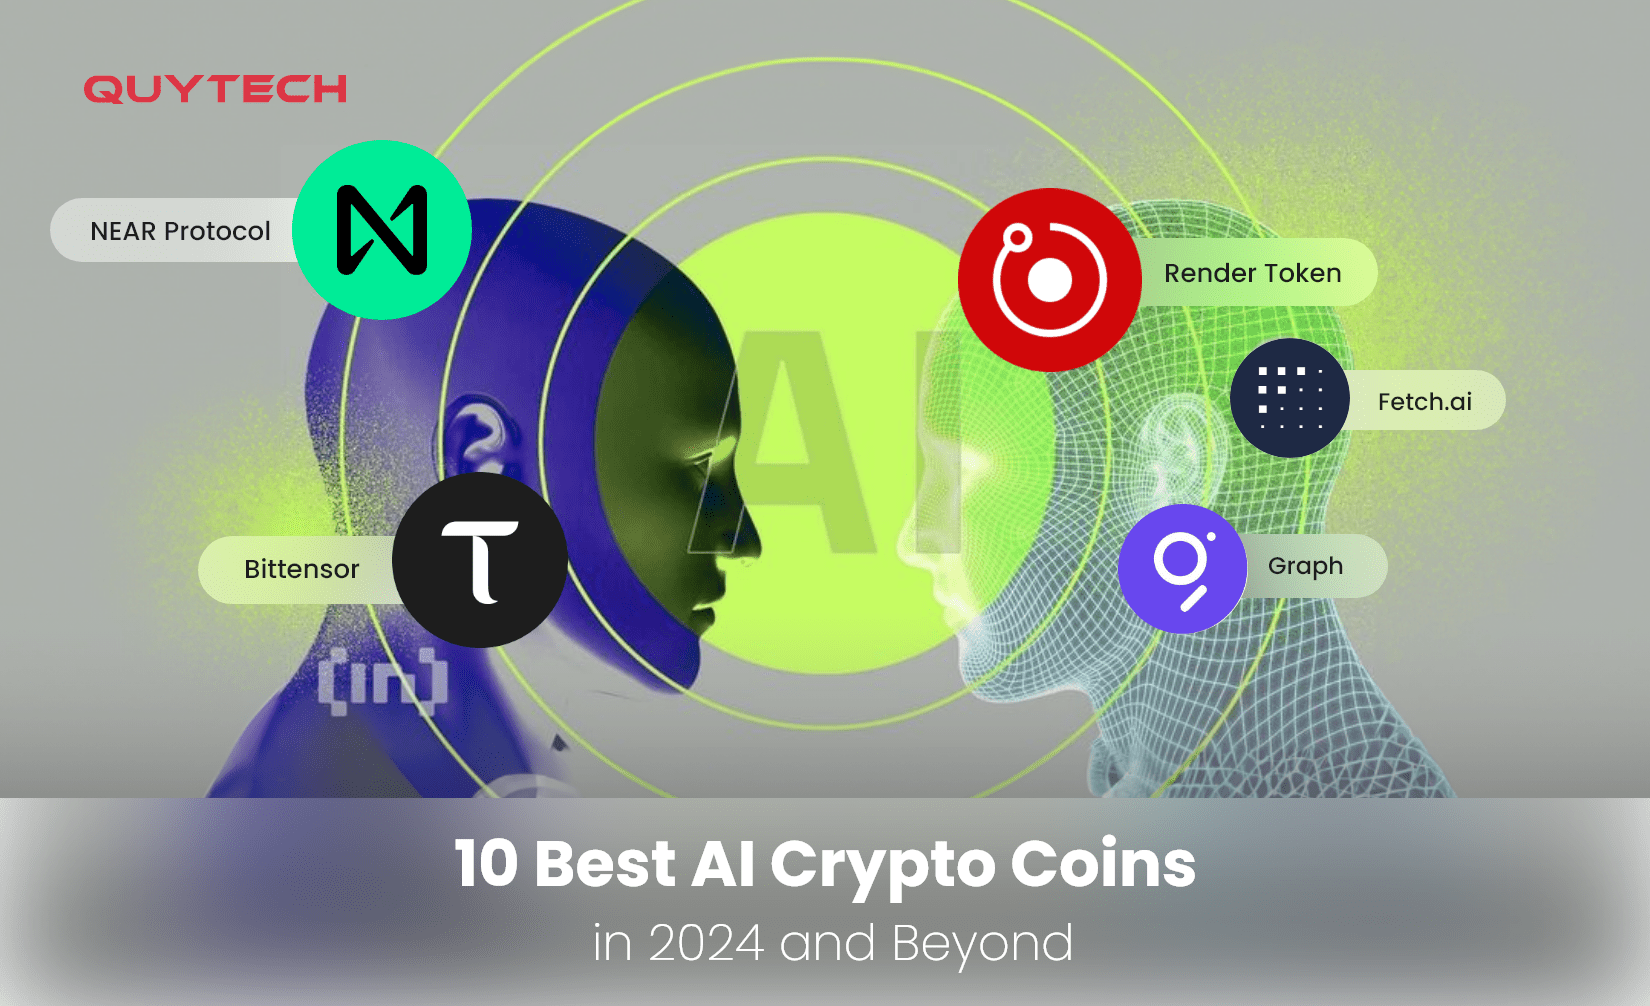 10 Best AI Crypto Coins in 2024 and Beyond